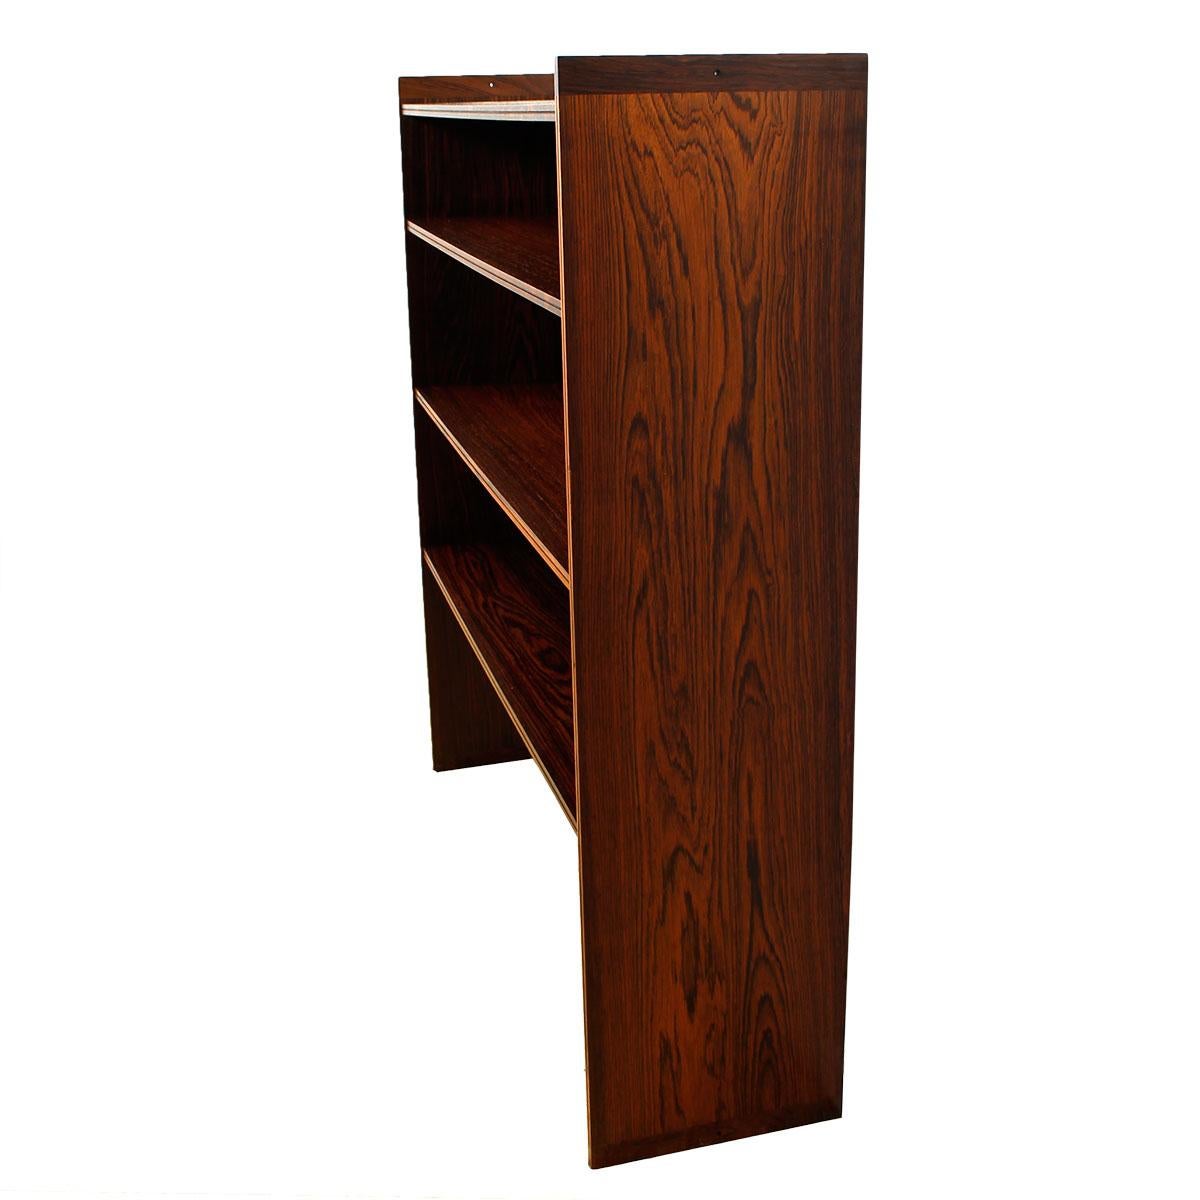 Mid-Century Modern Royal Danish Embassy Slender-Edged Bookcase by Grete Jalk in Brazilian Rosewood For Sale